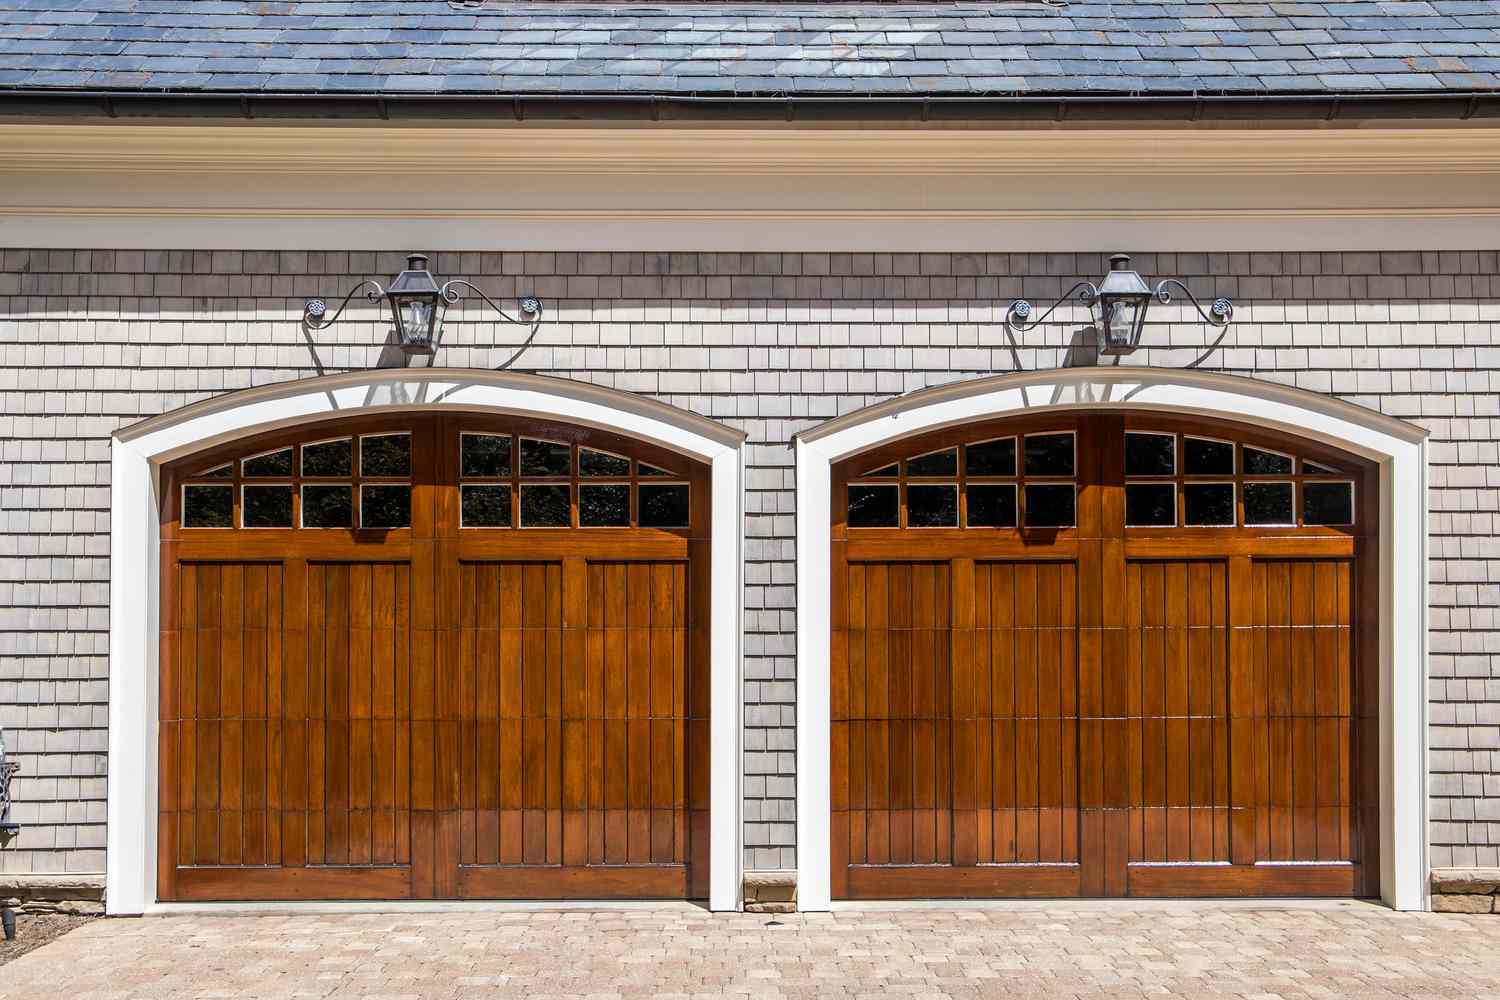 Stained wood custom garage doors for large southern home